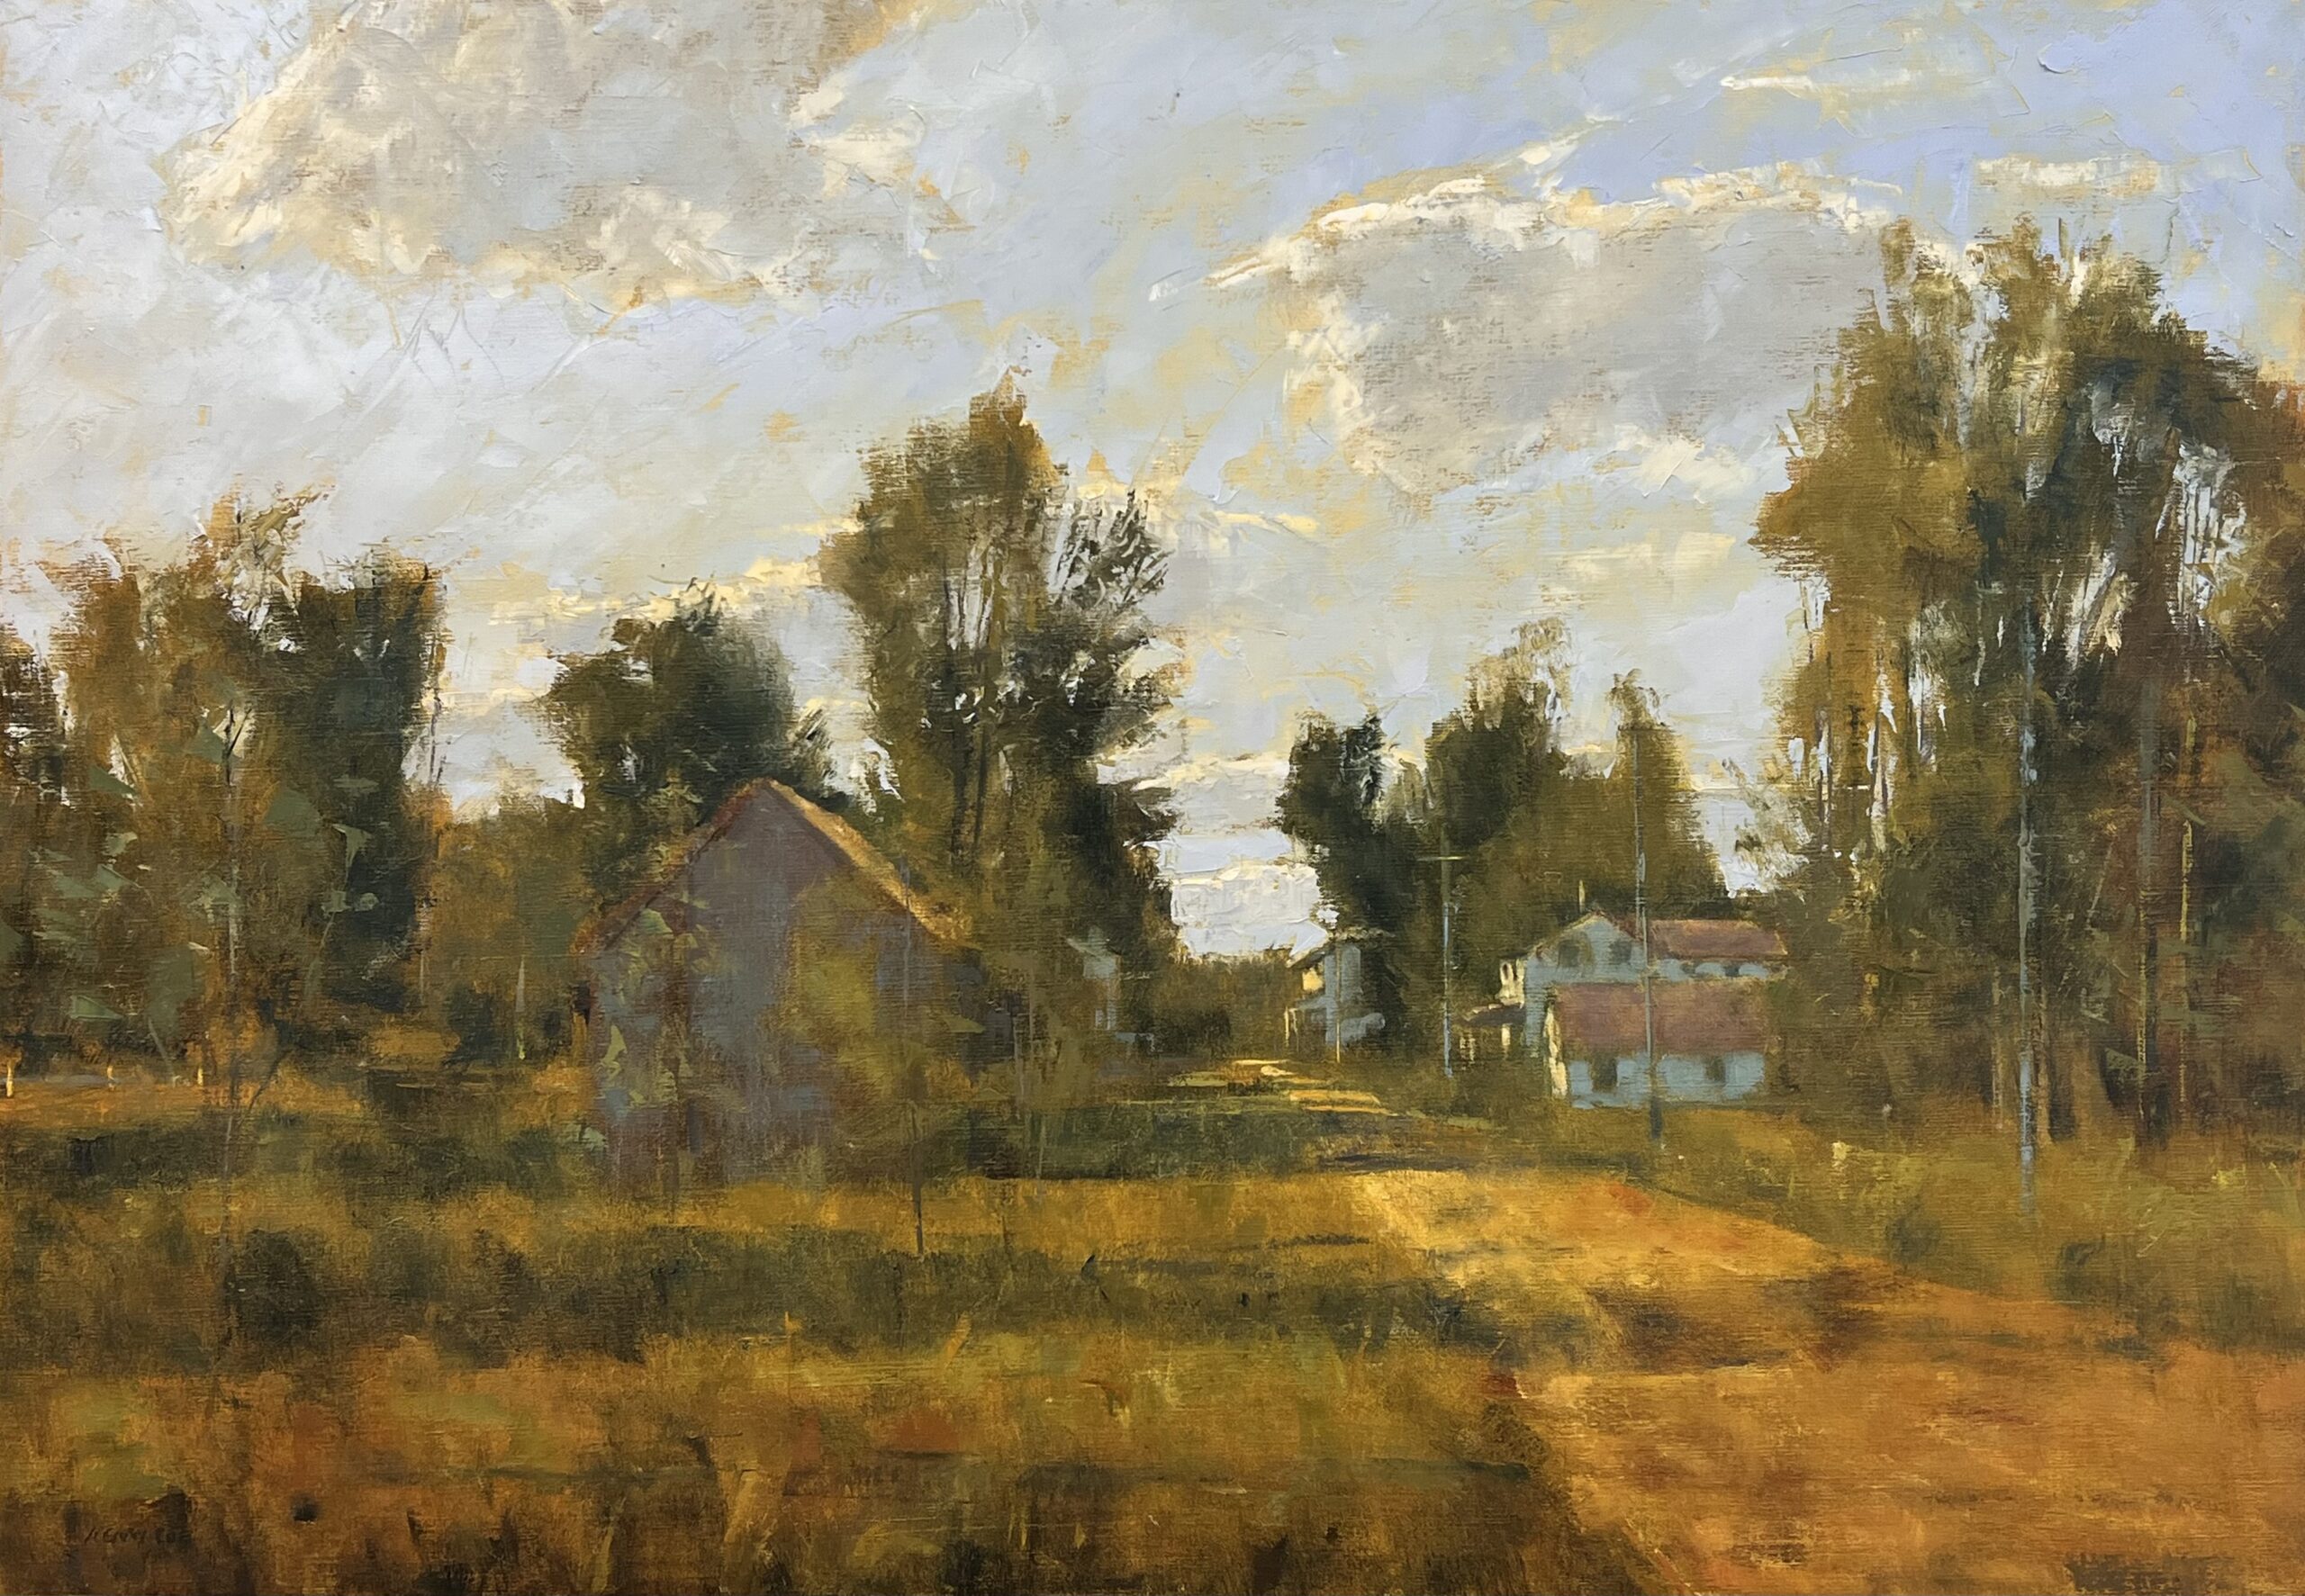 Best in Show: "Old Ridge Rd." (oil) by Henry Coe